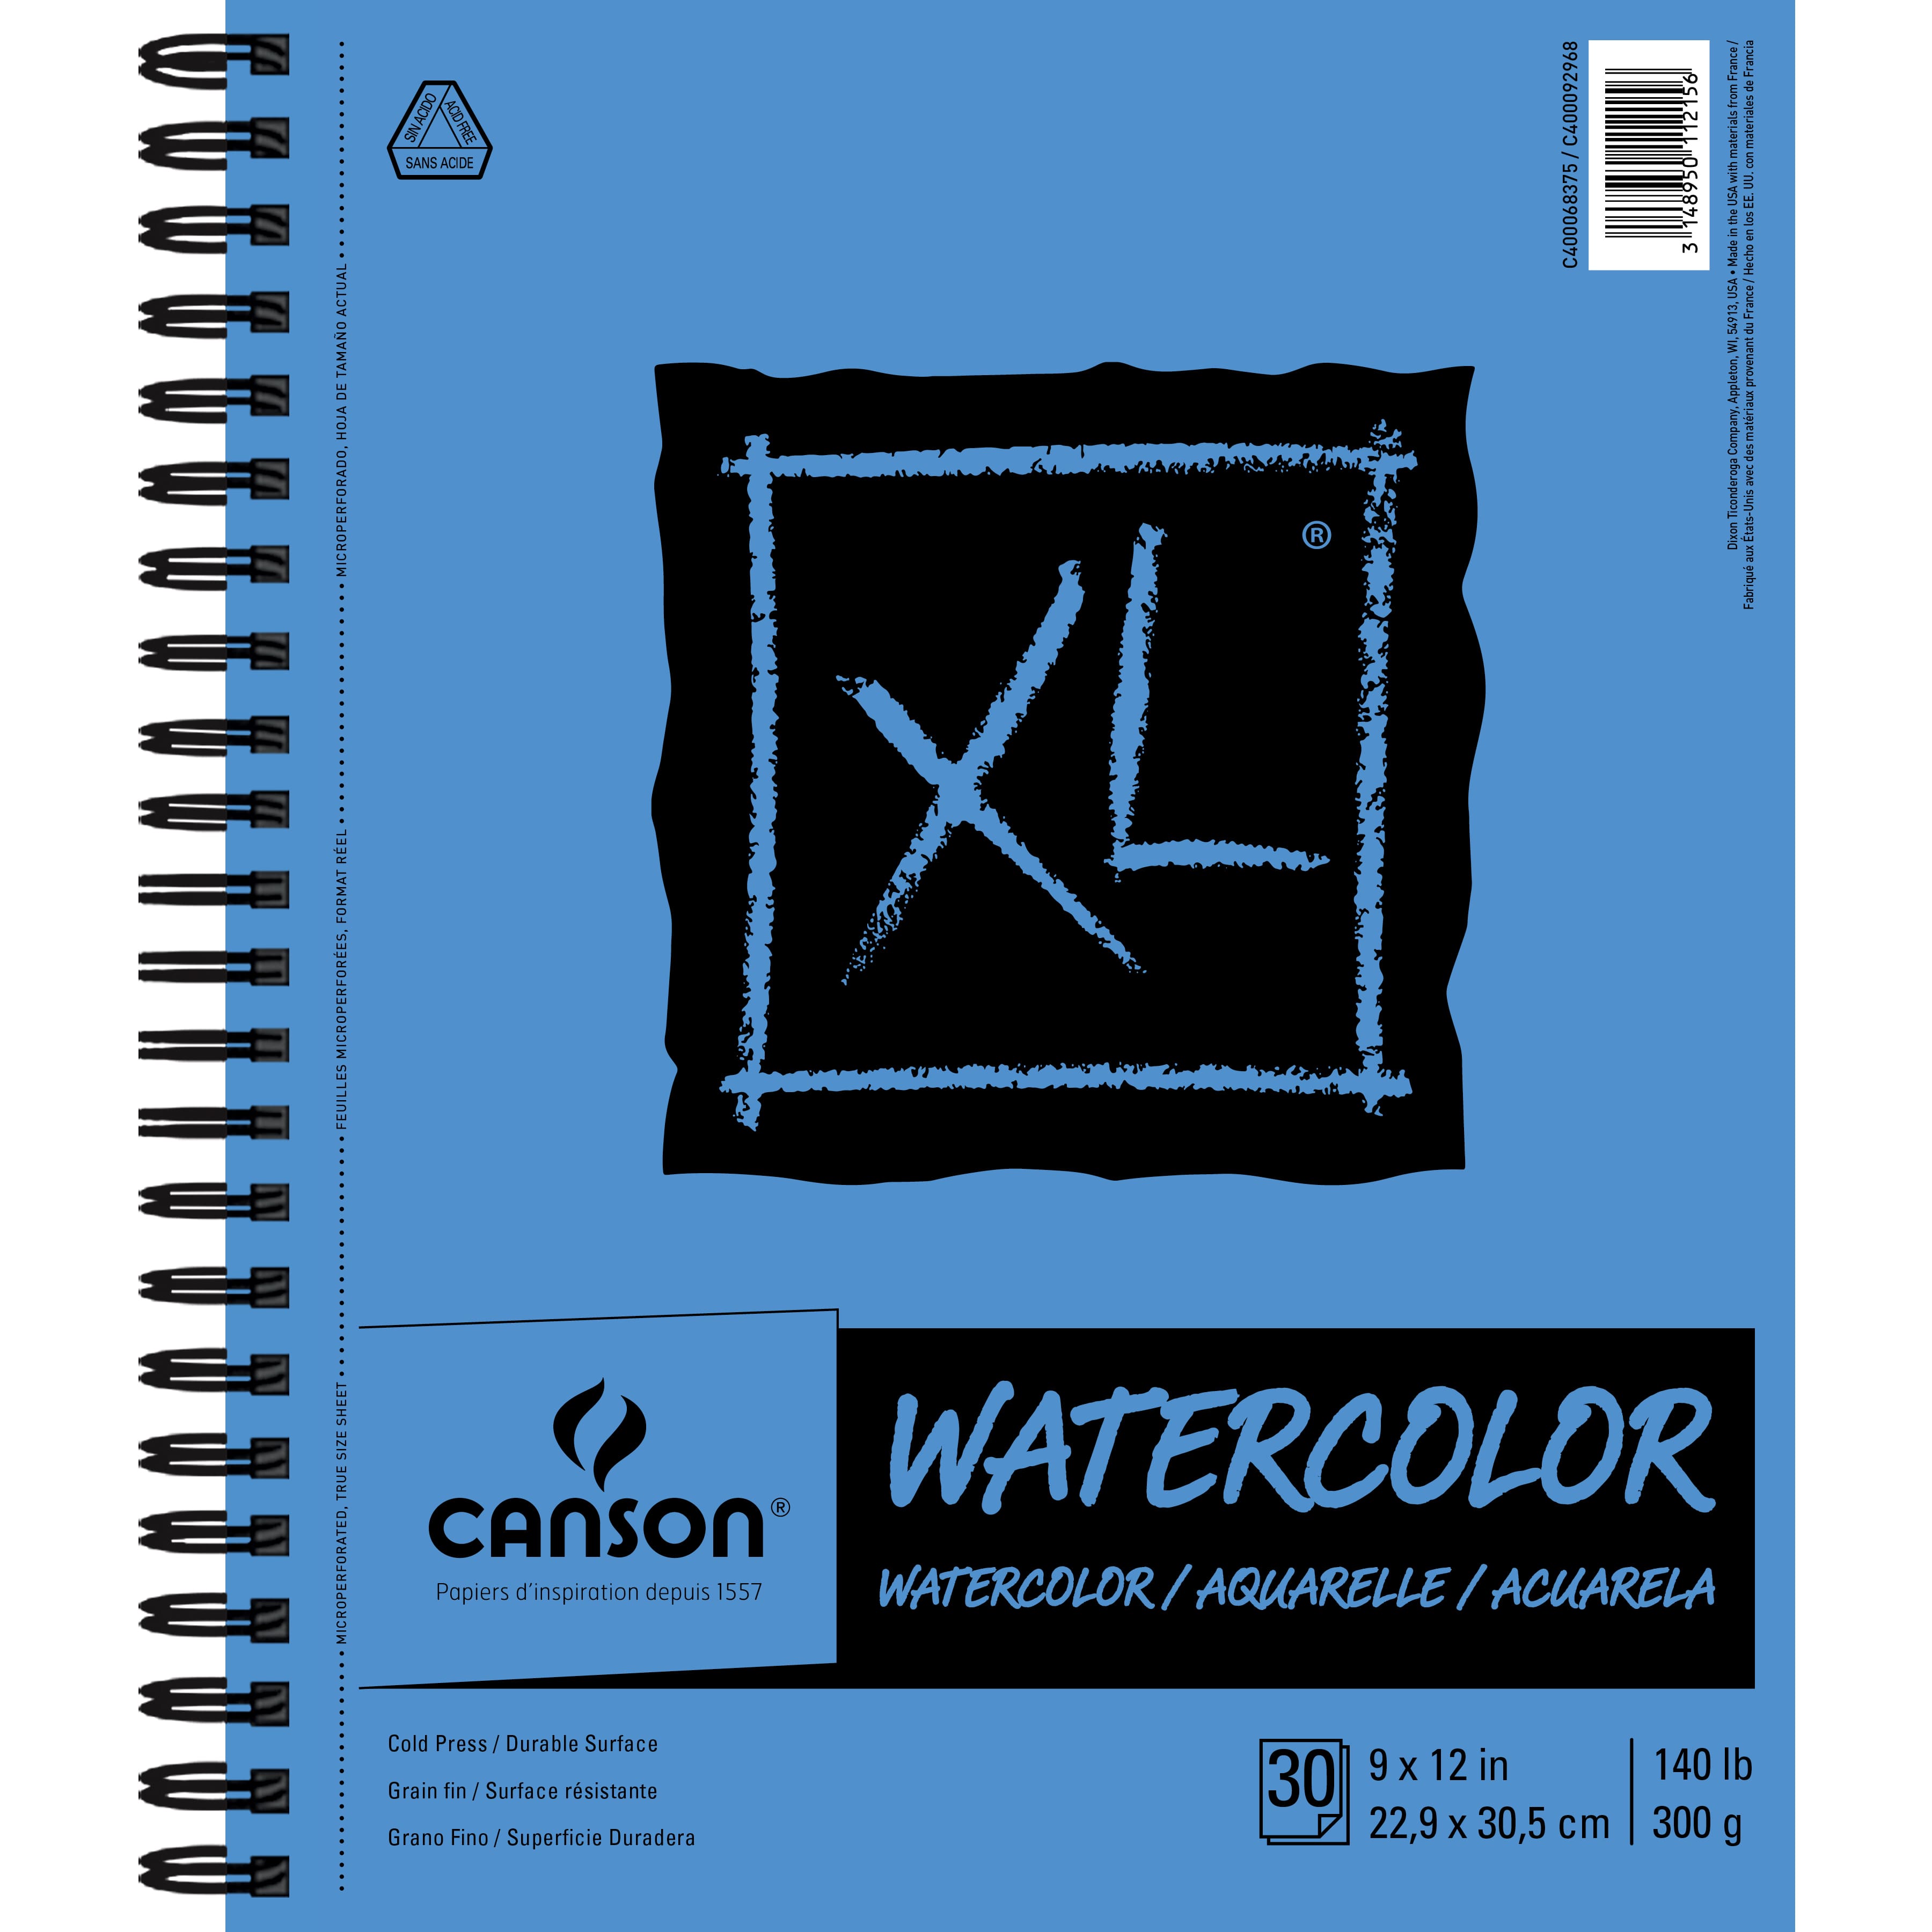 Canson : XL : Watercolour : Spiral Pad : 300gsm : 30 Sheets : A3 : Cold  Pressed - Canson : XL - Canson - Brands